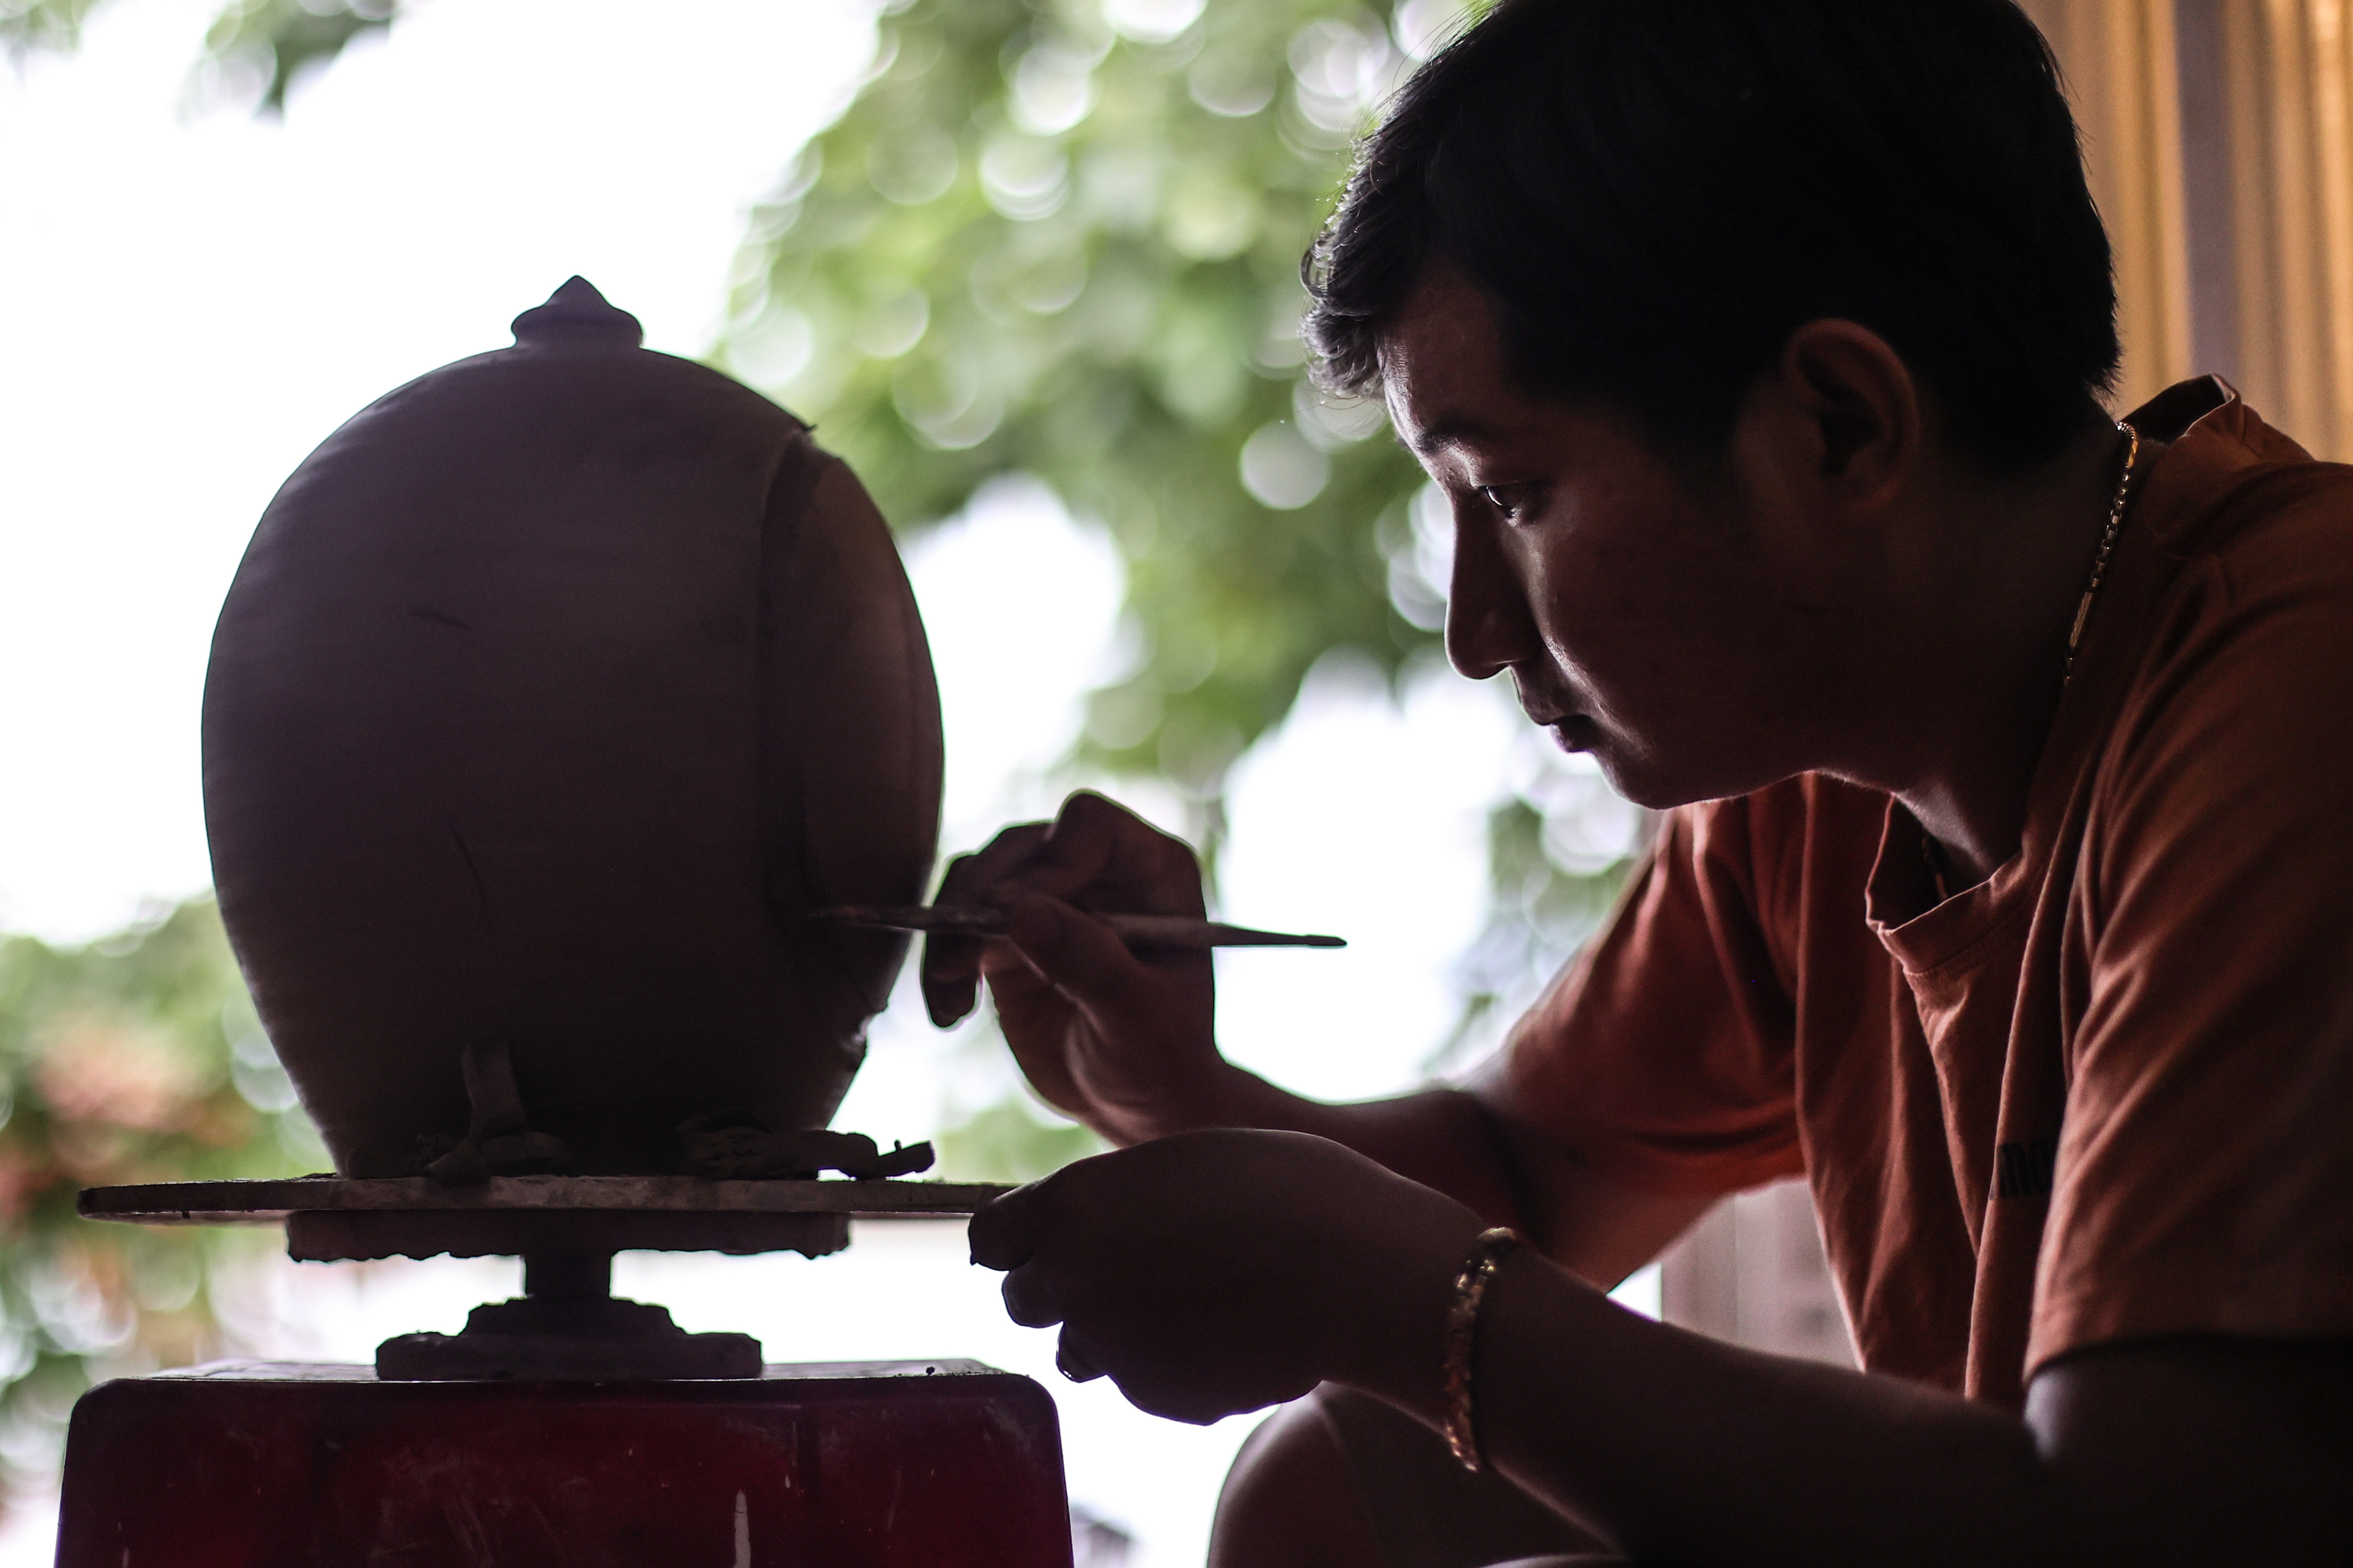 Nguyen Viet Lam, 24, followed in his family’s footsteps to become a pottery maker. Photo: Nguyen Khanh